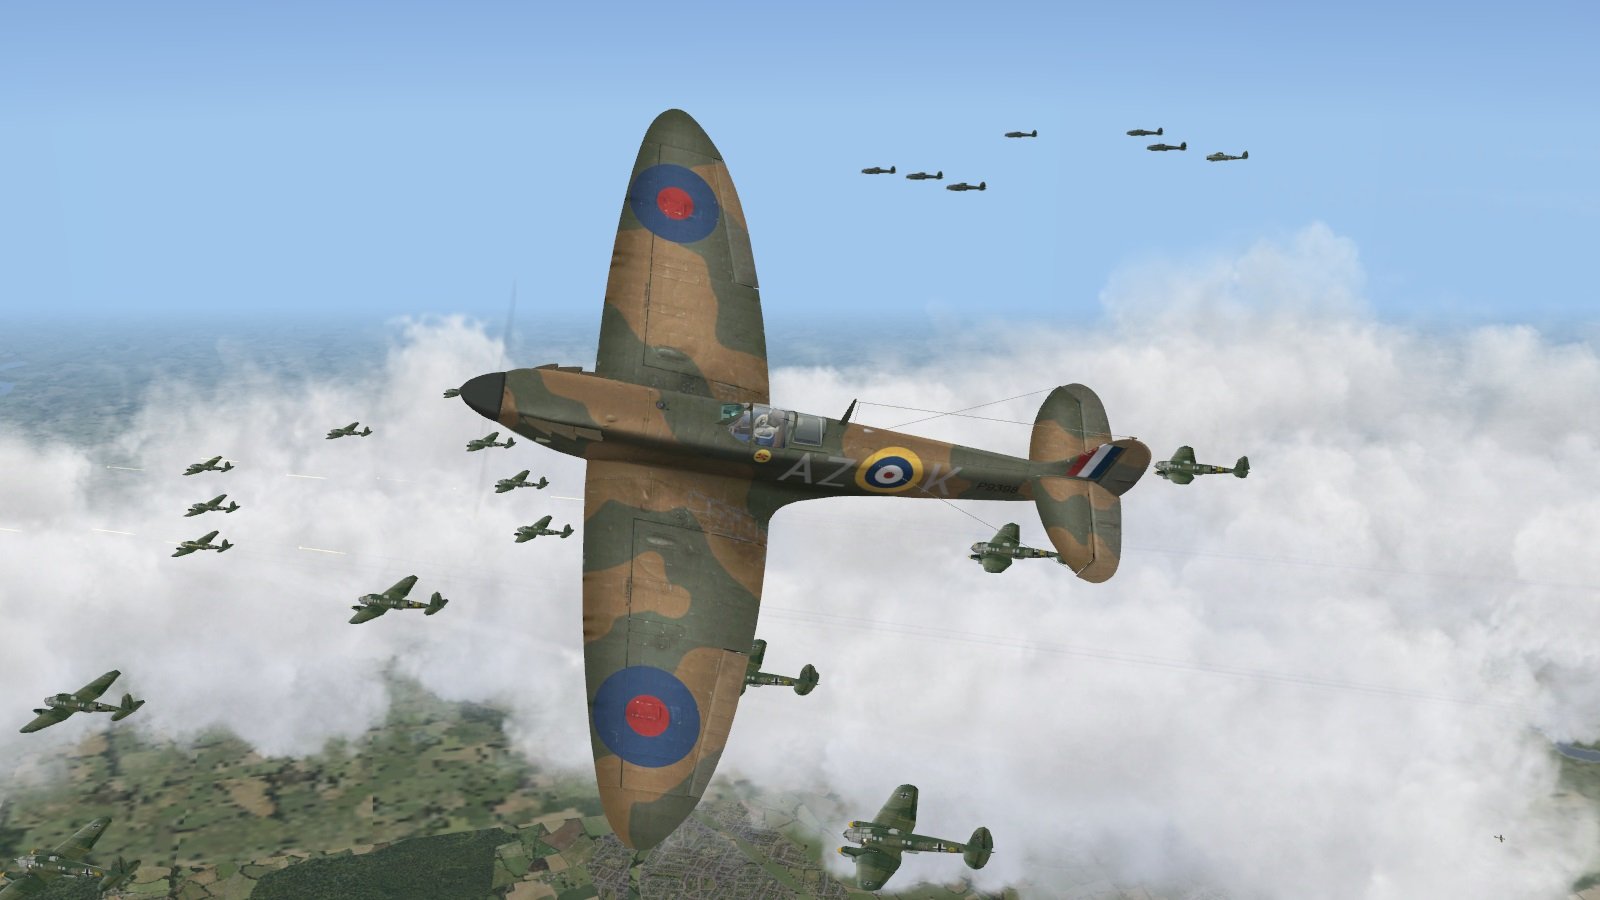 Battle of Brtain II - 20 July 1940 - attacking Heinkels bound for Tangmere